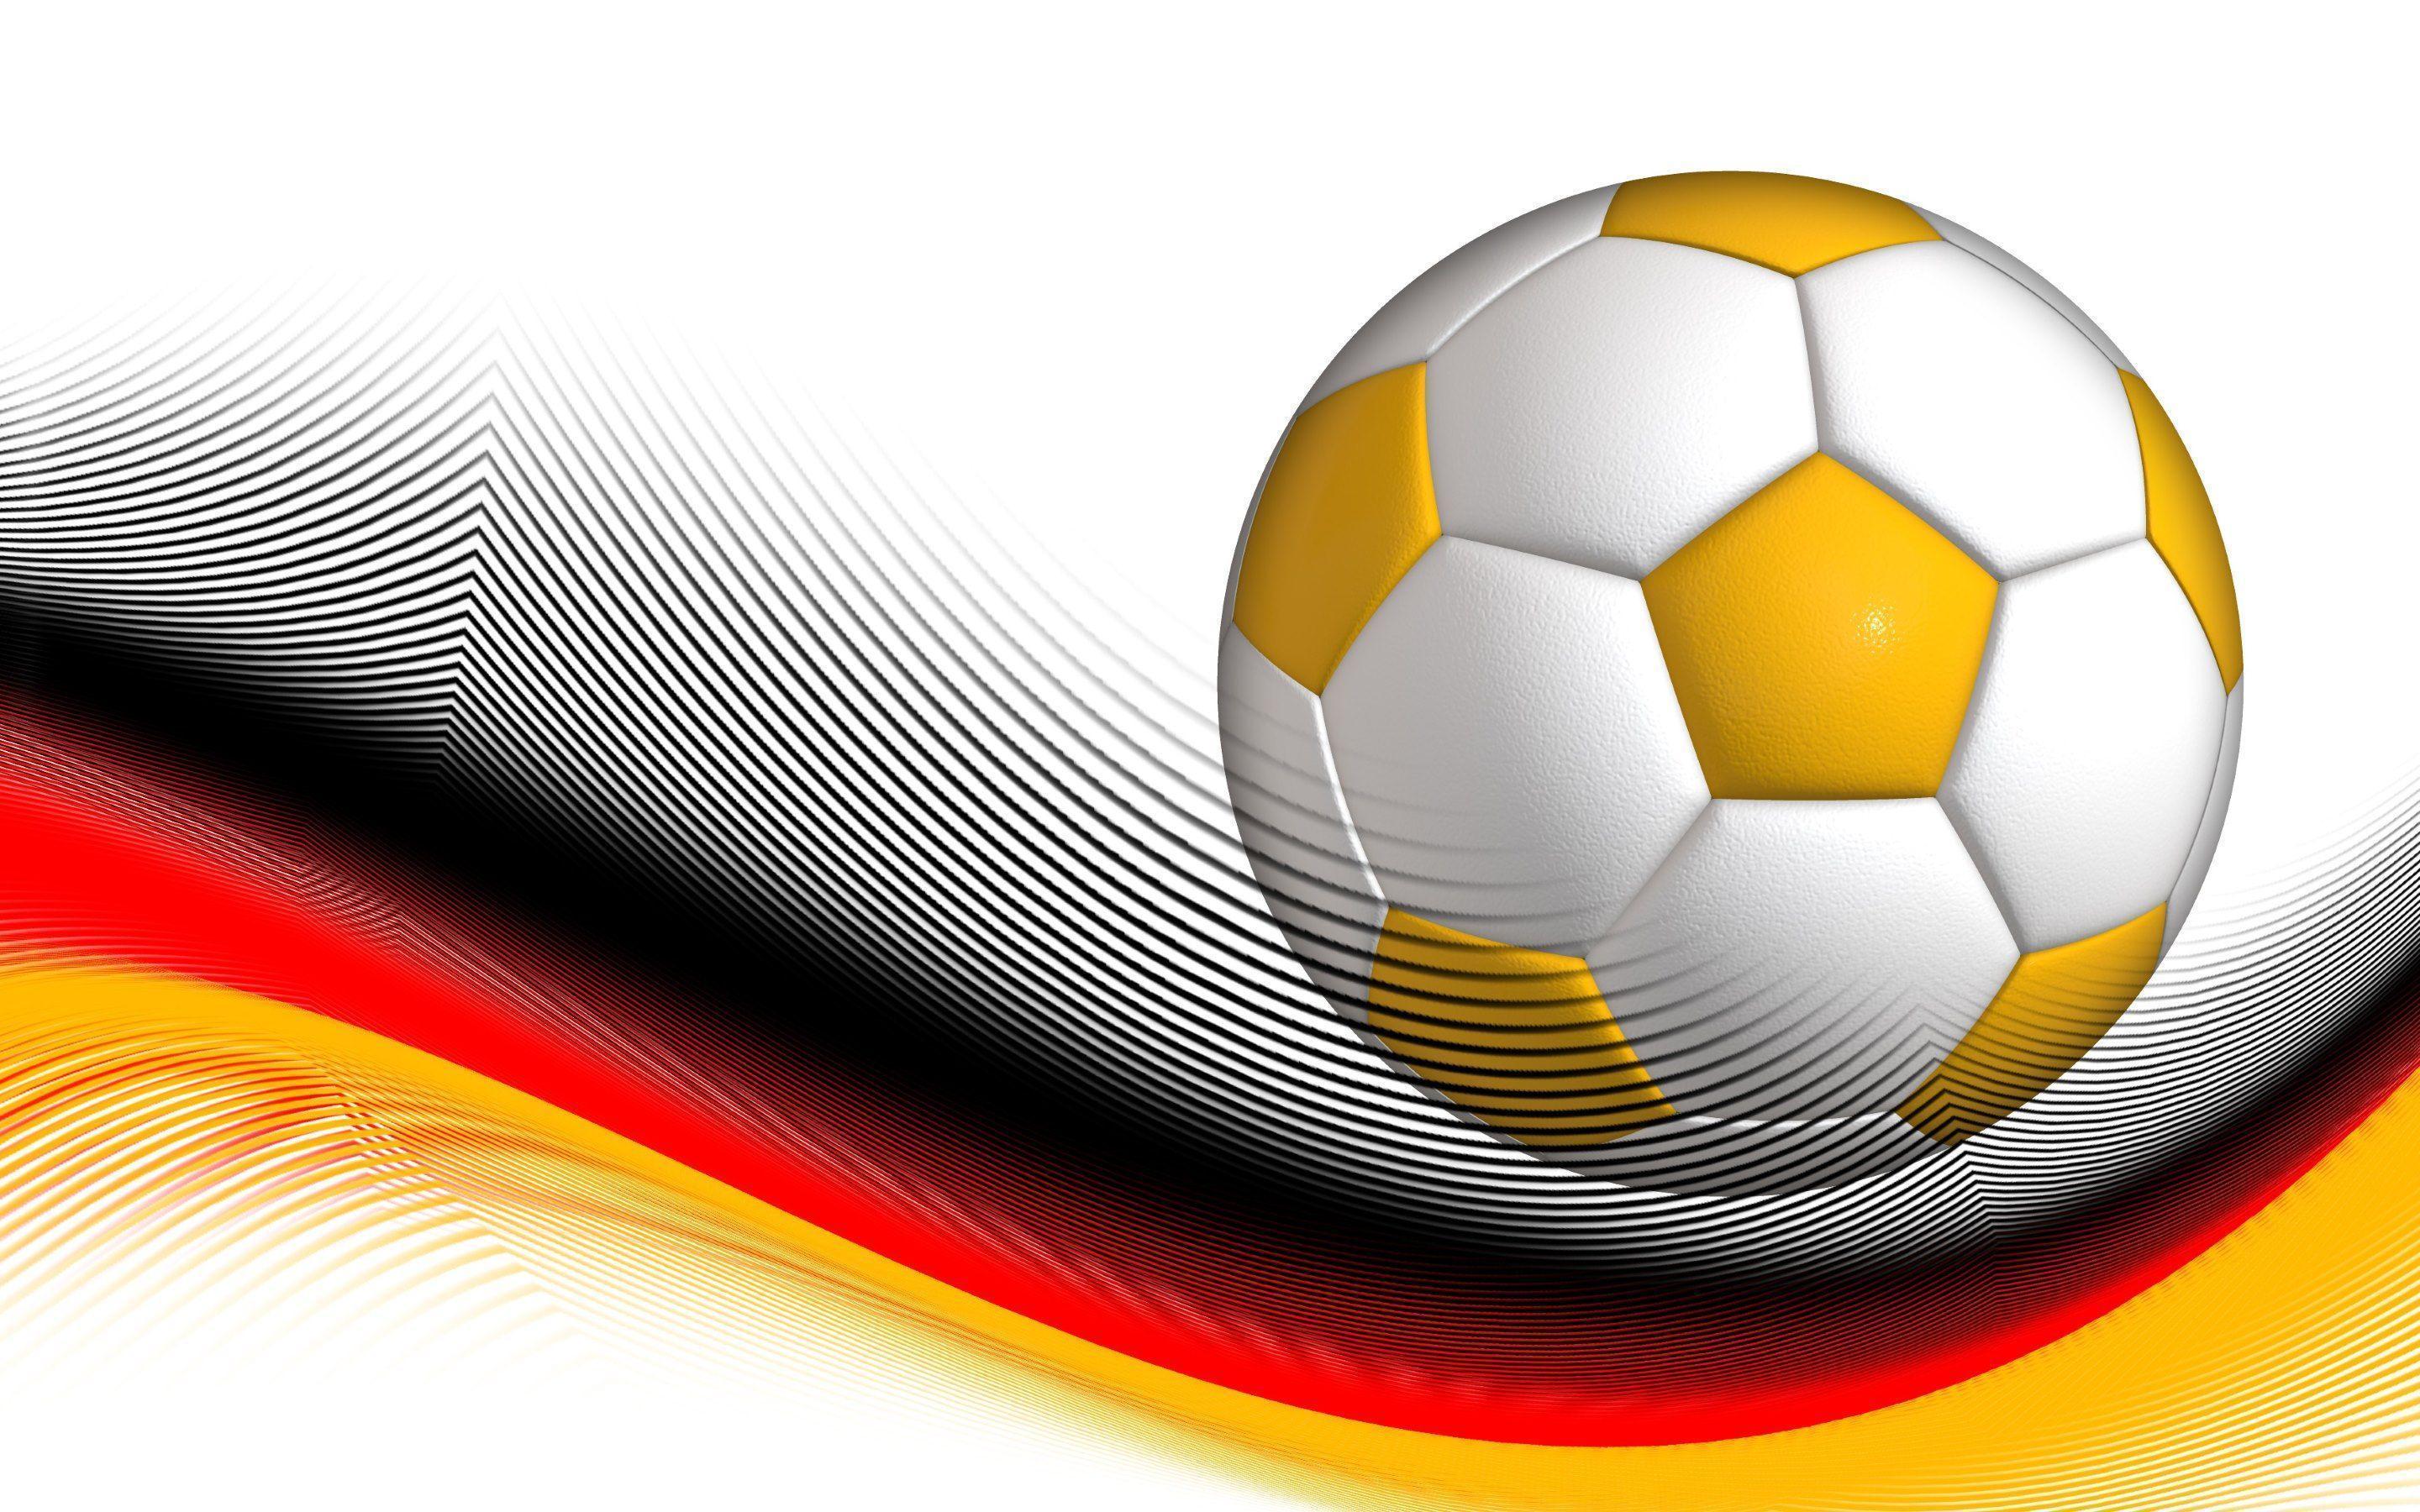 Soccer Balls Wallpaper in HD, 4K and wide sizes